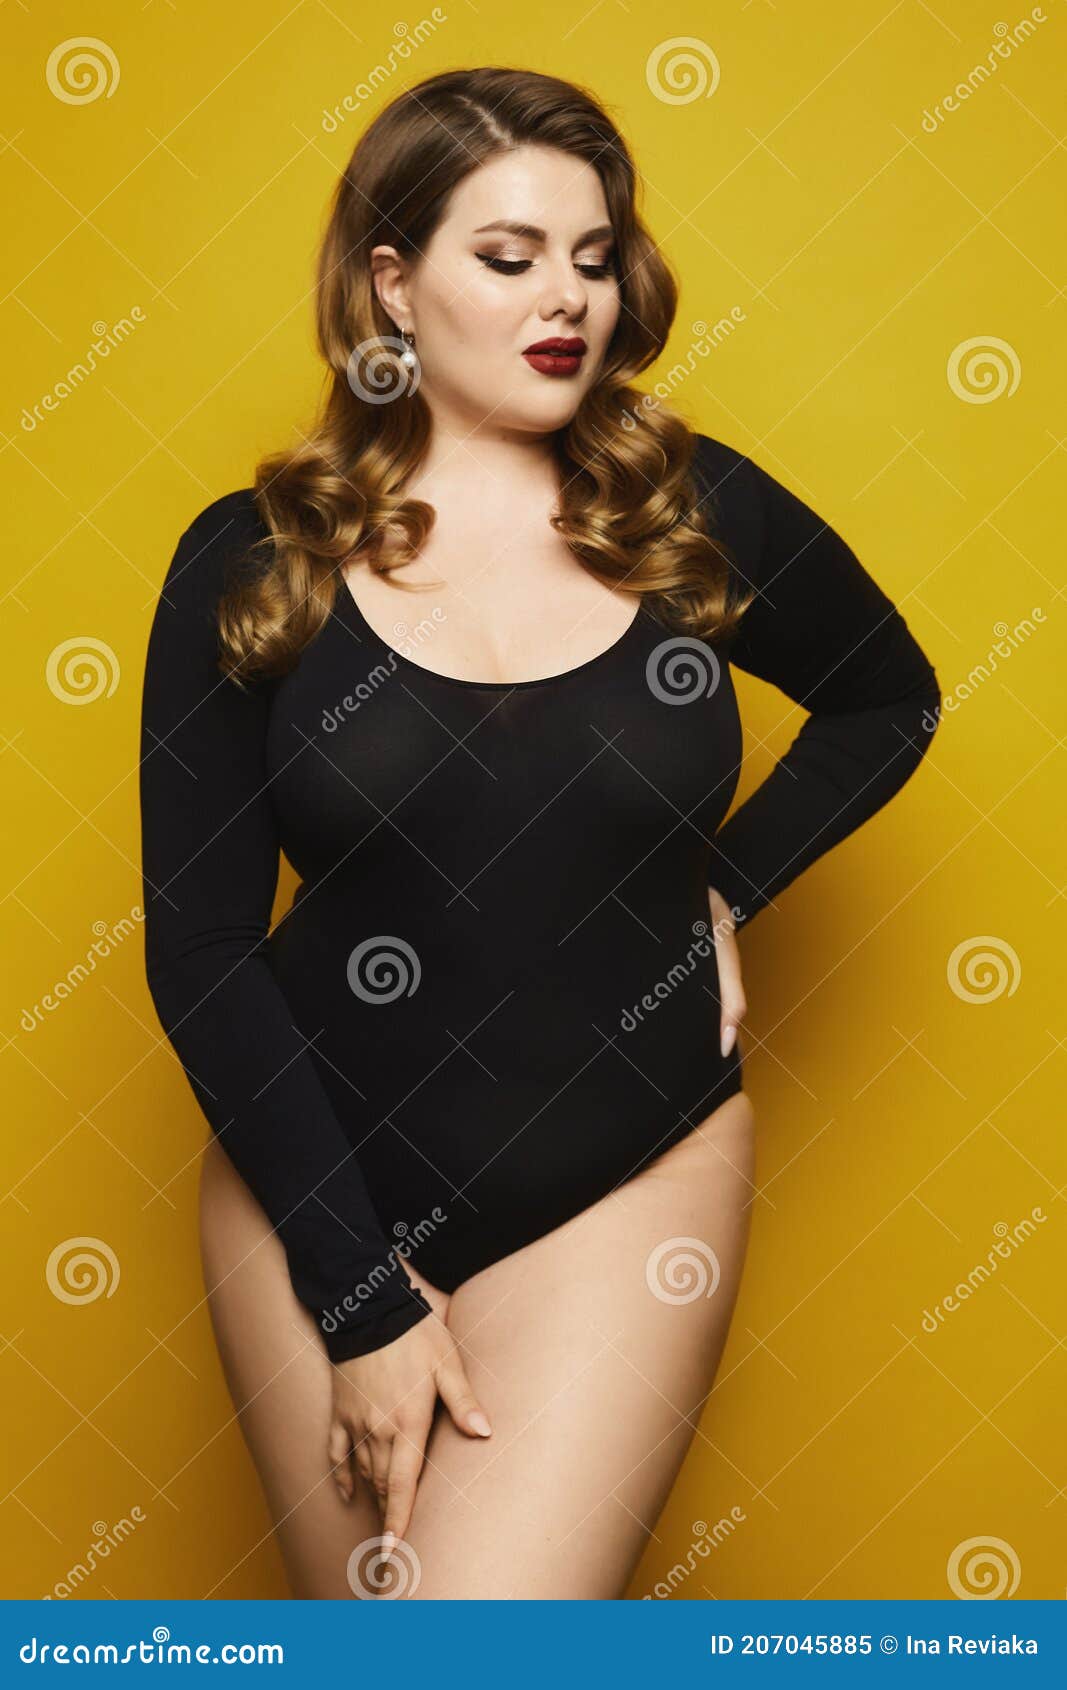 https://thumbs.dreamstime.com/z/sexy-plump-woman-black-bodysuit-posing-over-yellow-background-plus-size-model-girl-bright-makeup-stylish-hairstyle-207045885.jpg